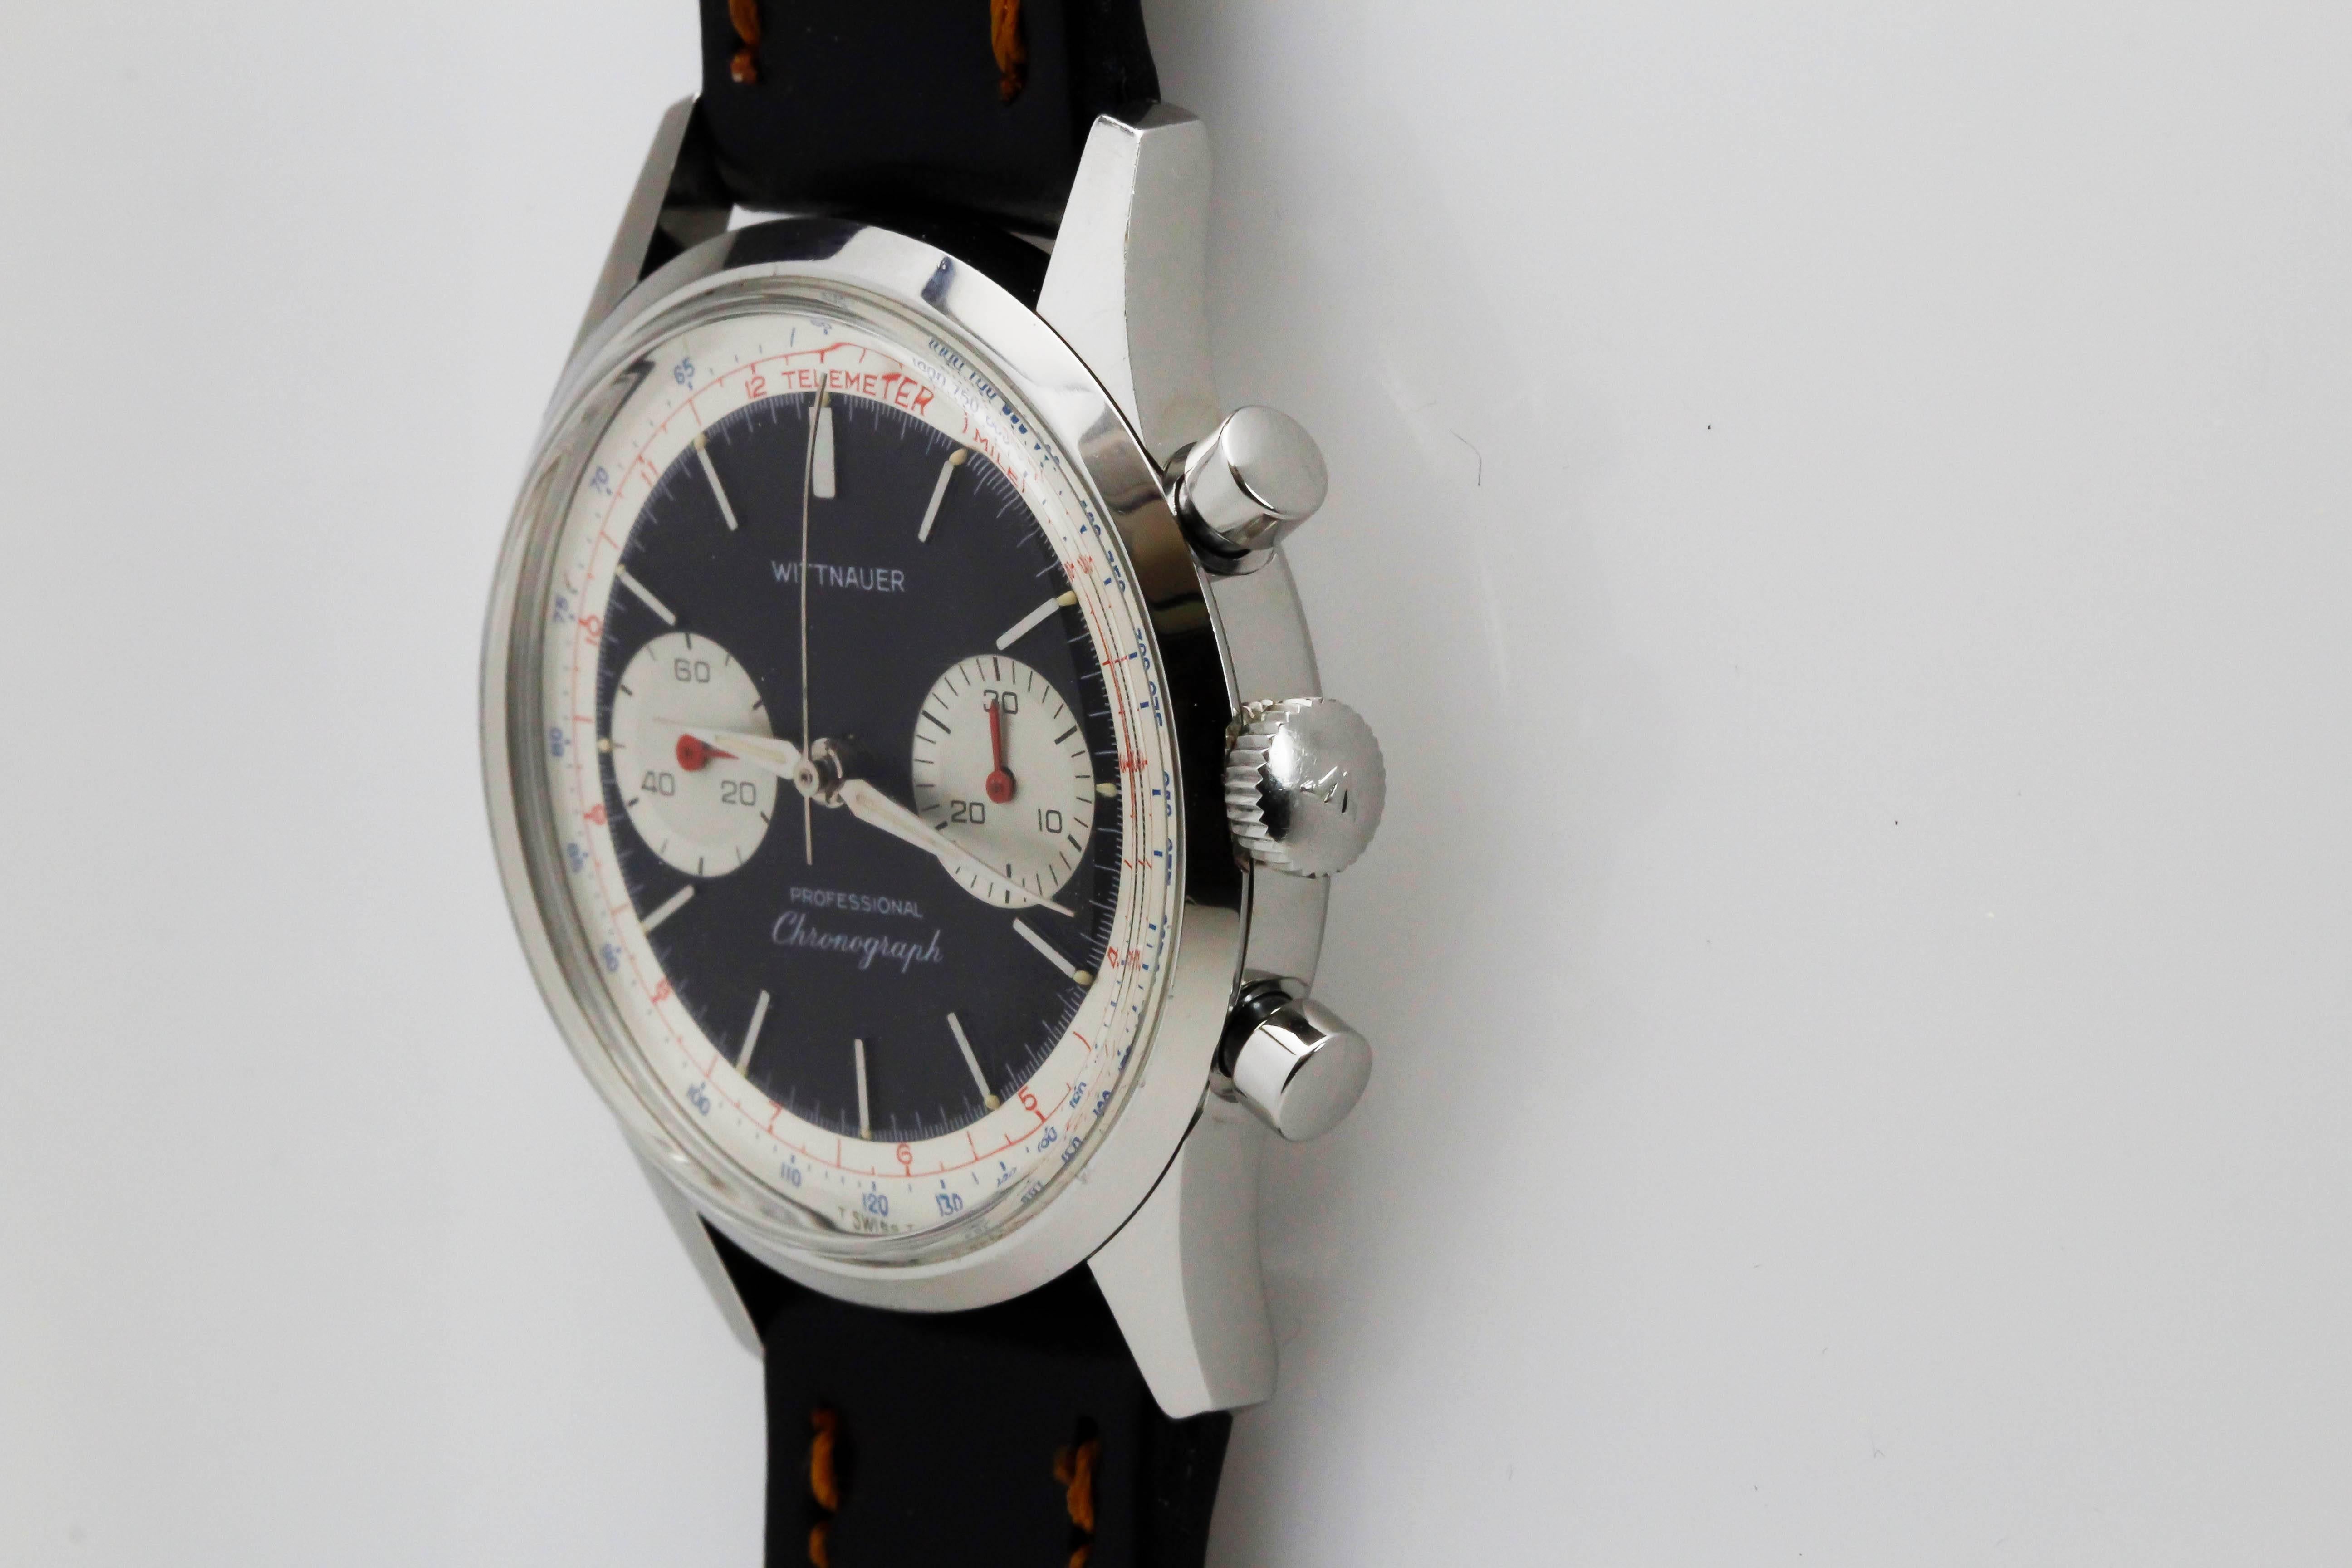 Wittnauer Stainless Steel Professional Chronograph Wristwatch c. 1960's 1